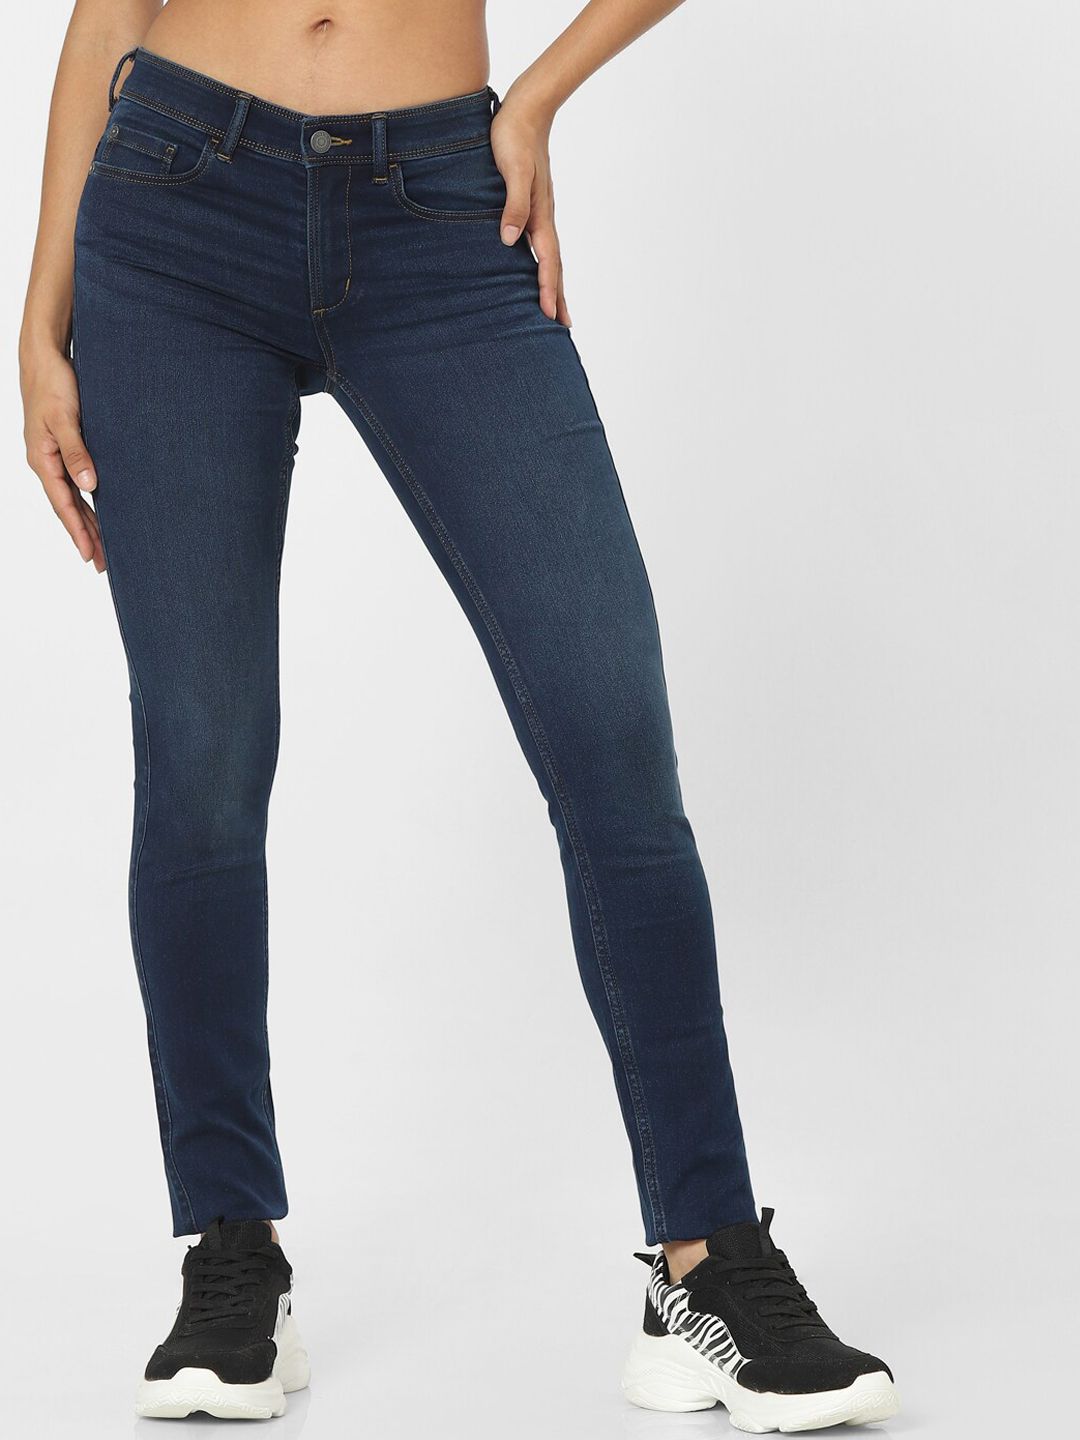 ONLY Women Blue Skinny Fit Light Fade Jeans Price in India